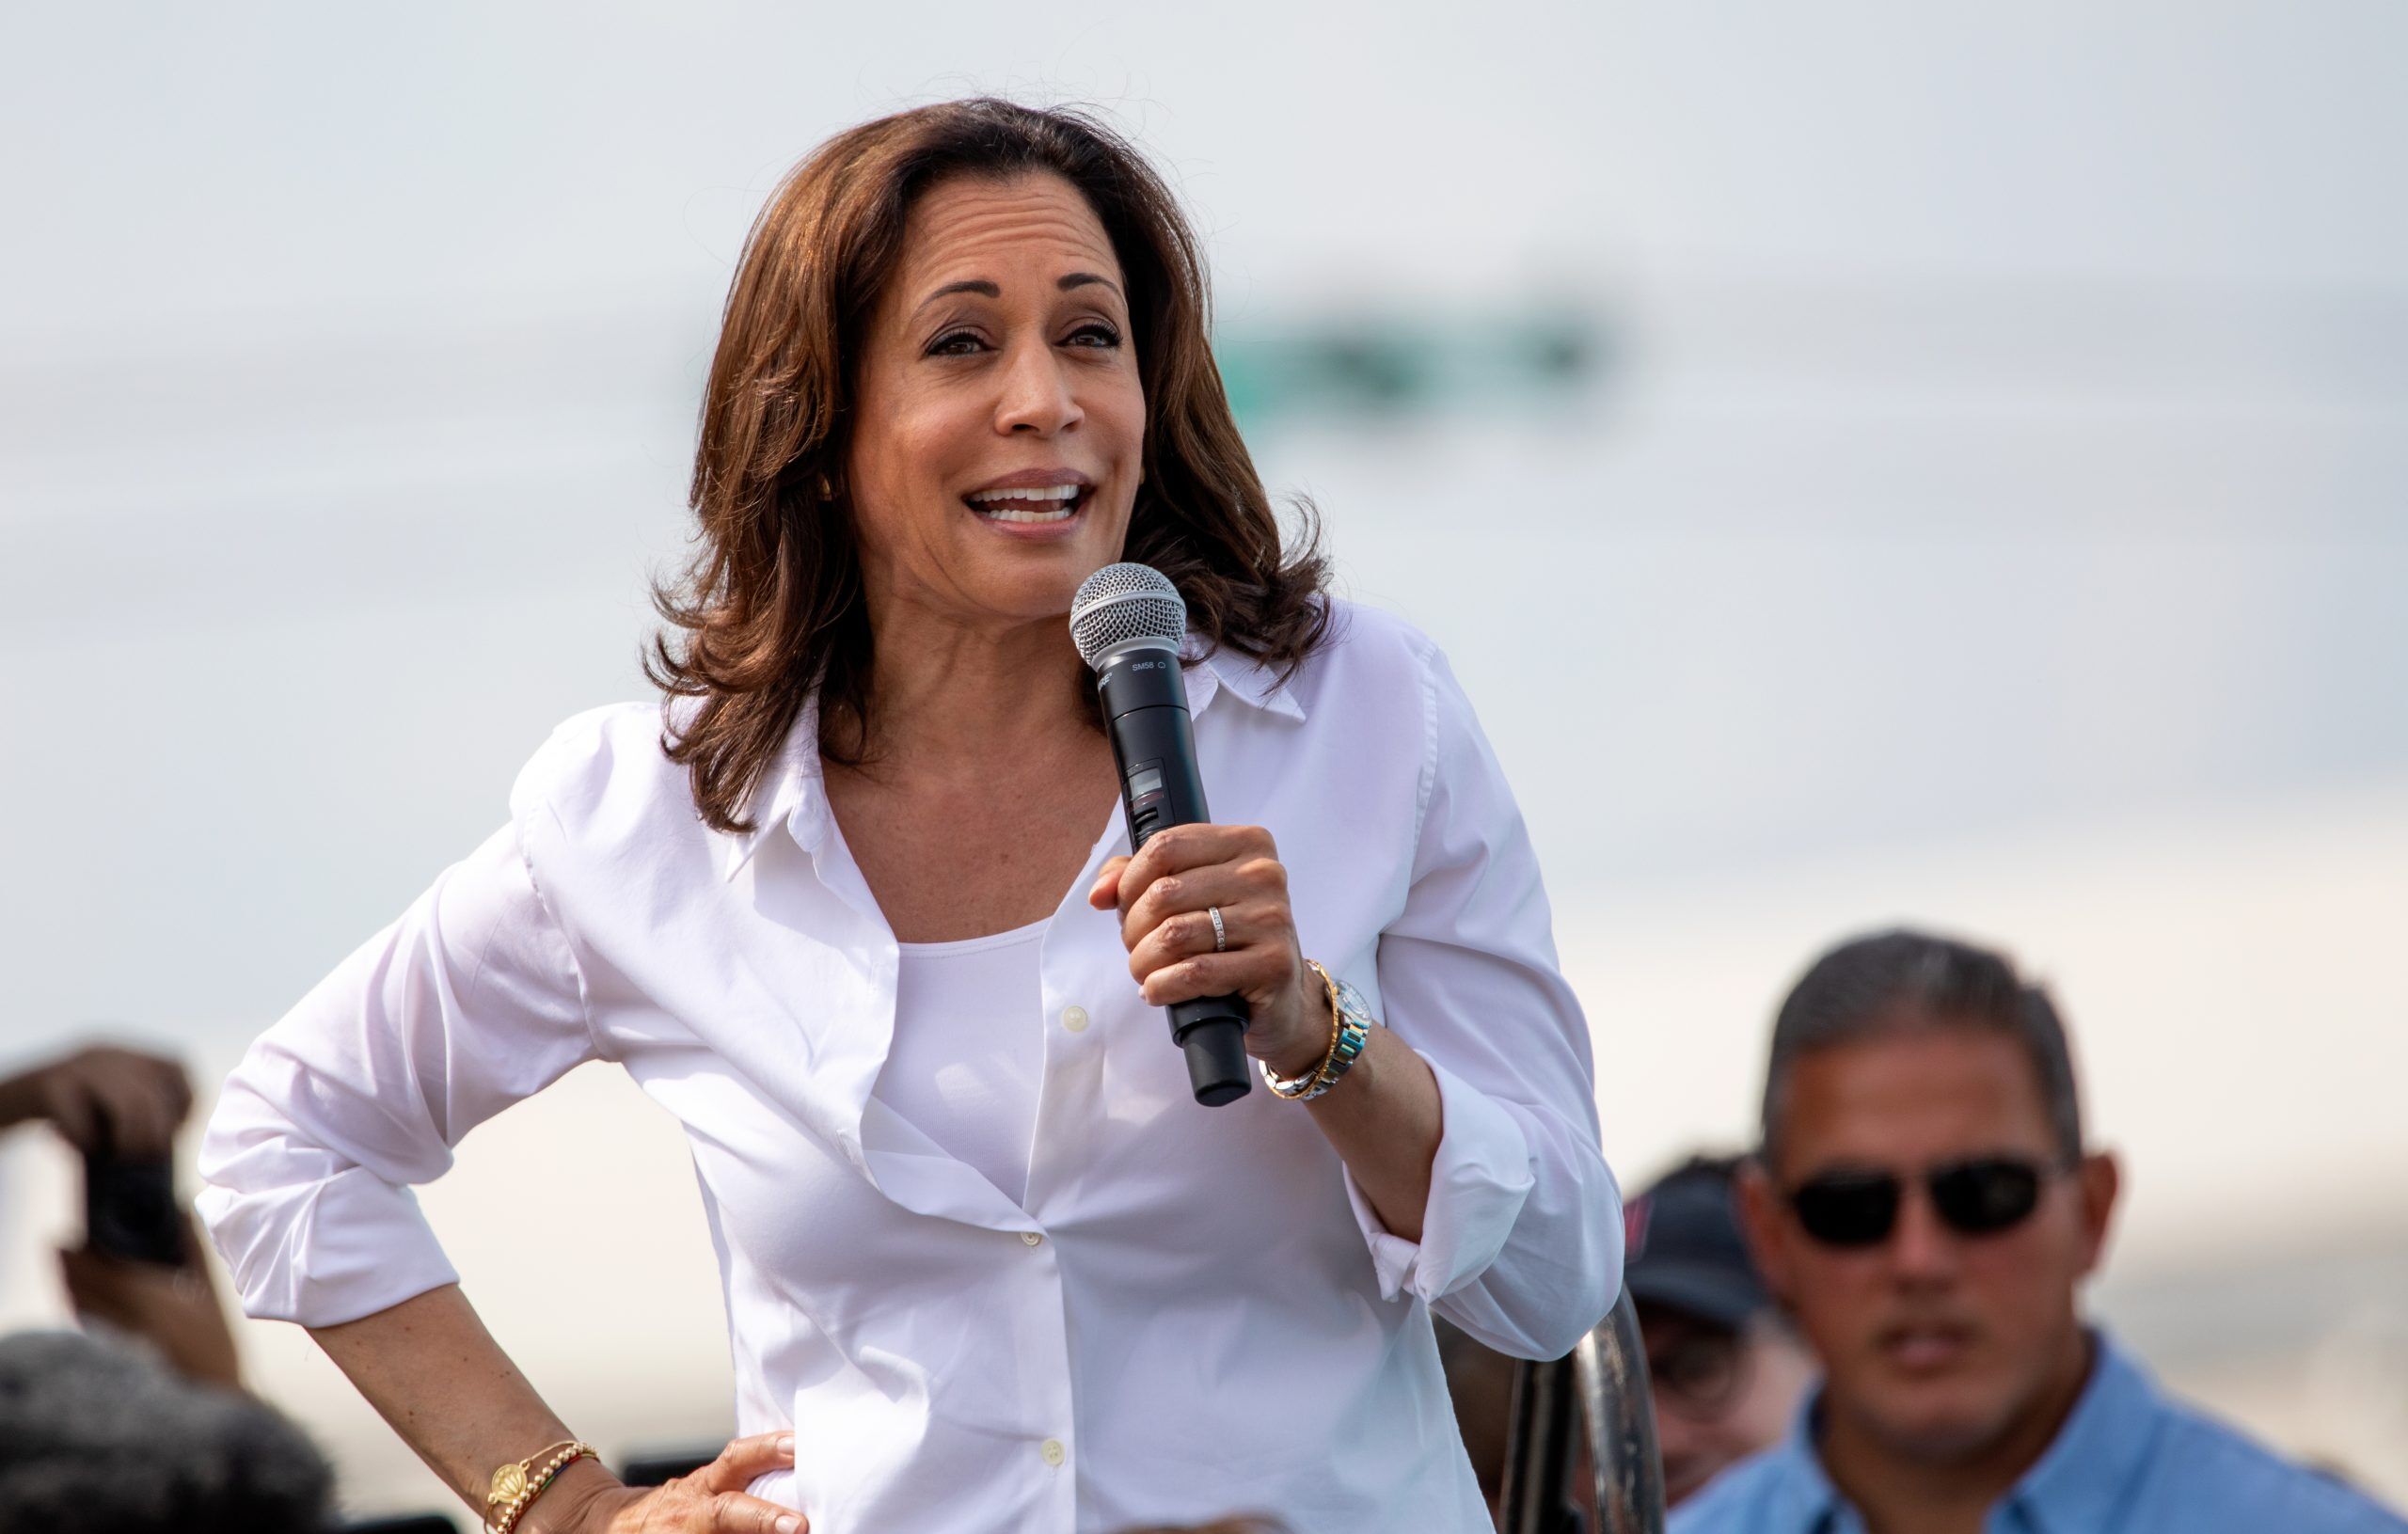 August 10, 2019: United States Senator and Democratic presidential candidate Kamala Harris greets supporters at the Iowa State Fair political soapbox in Des Moines, Iowa.